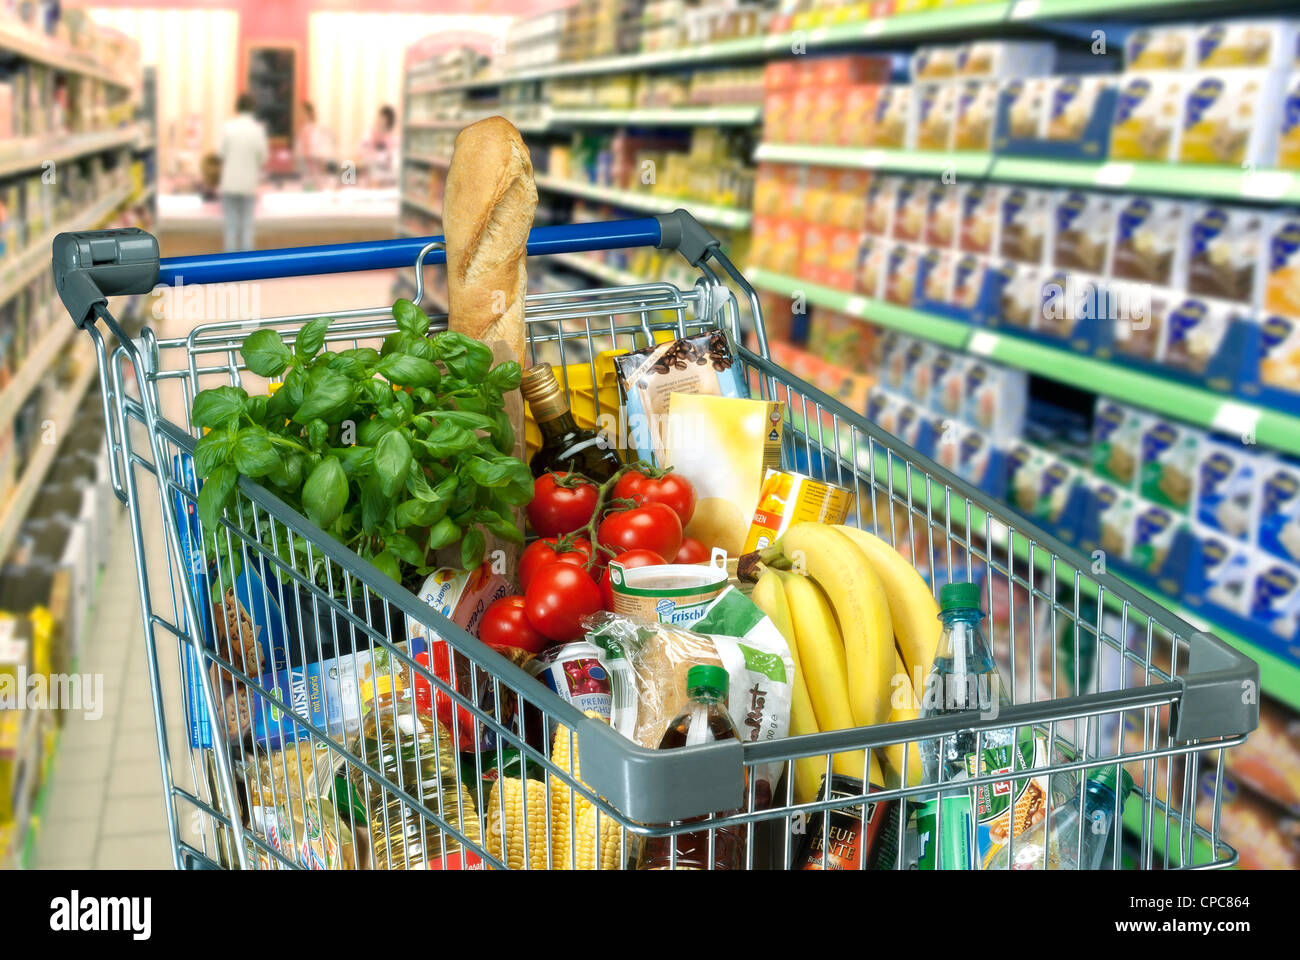 Food in a shopping trolley in a supermarket. Stock Photo